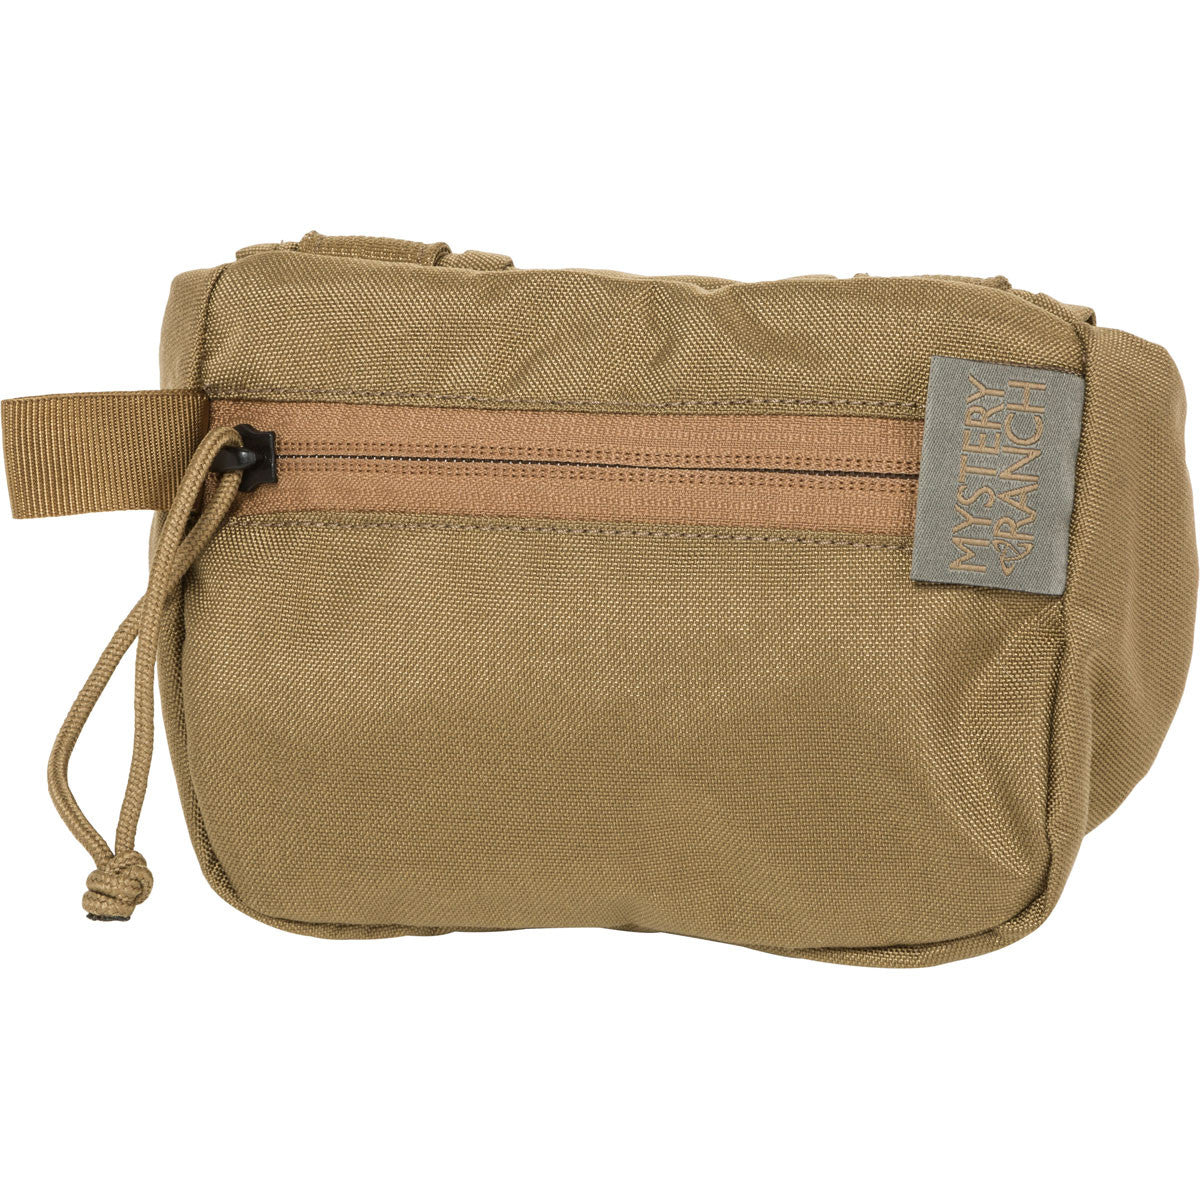 Mystery Ranch Forager Pocket Large - Coyote -  - Mansfield Hunting & Fishing - Products to prepare for Corona Virus